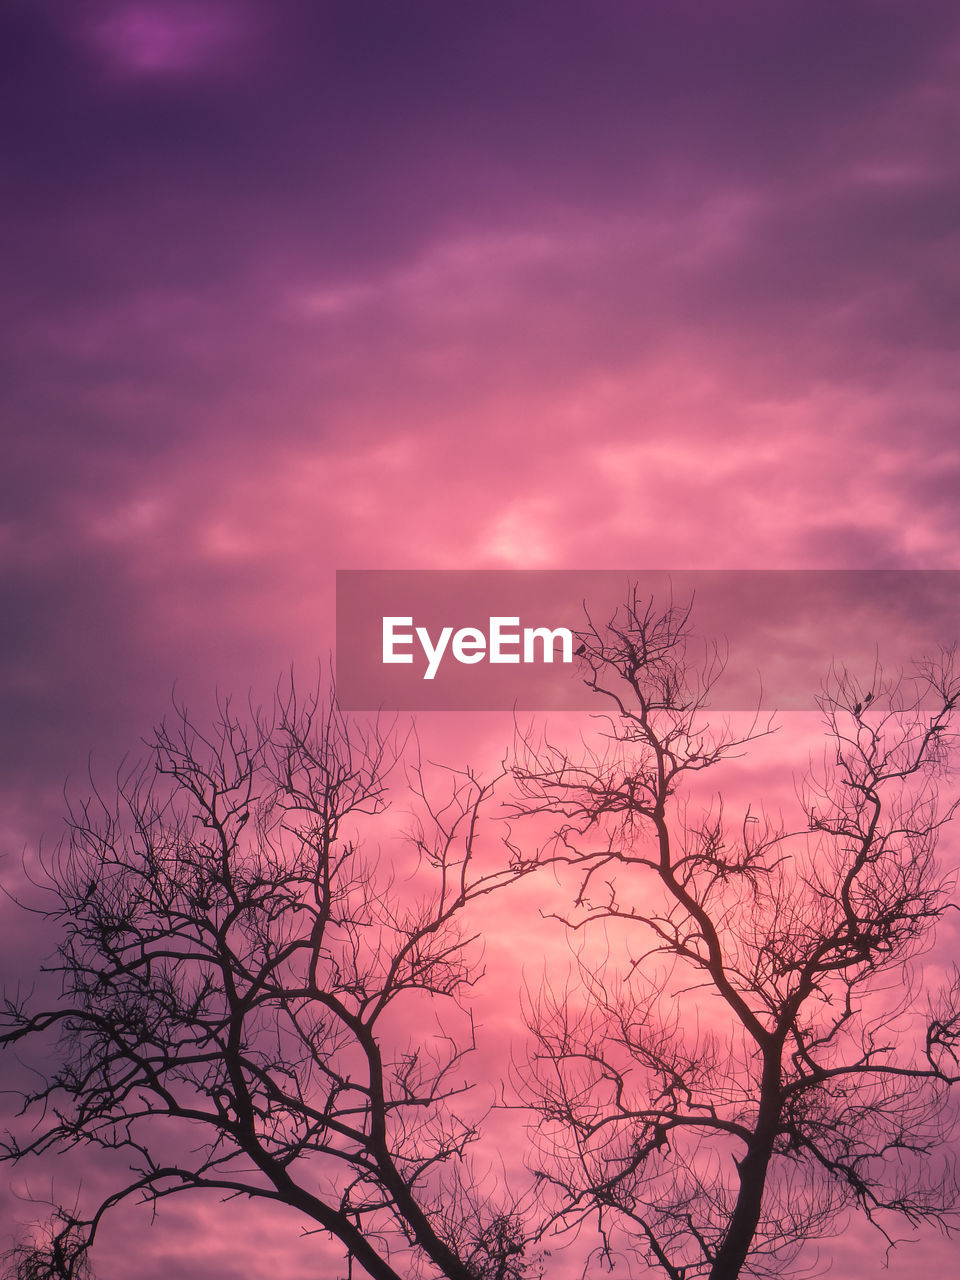 sky, tree, pink, cloud, bare tree, plant, beauty in nature, nature, dawn, branch, sunset, scenics - nature, no people, silhouette, dramatic sky, tranquility, outdoors, purple, evening, environment, low angle view, landscape, red sky at morning, magenta, tranquil scene, cloudscape